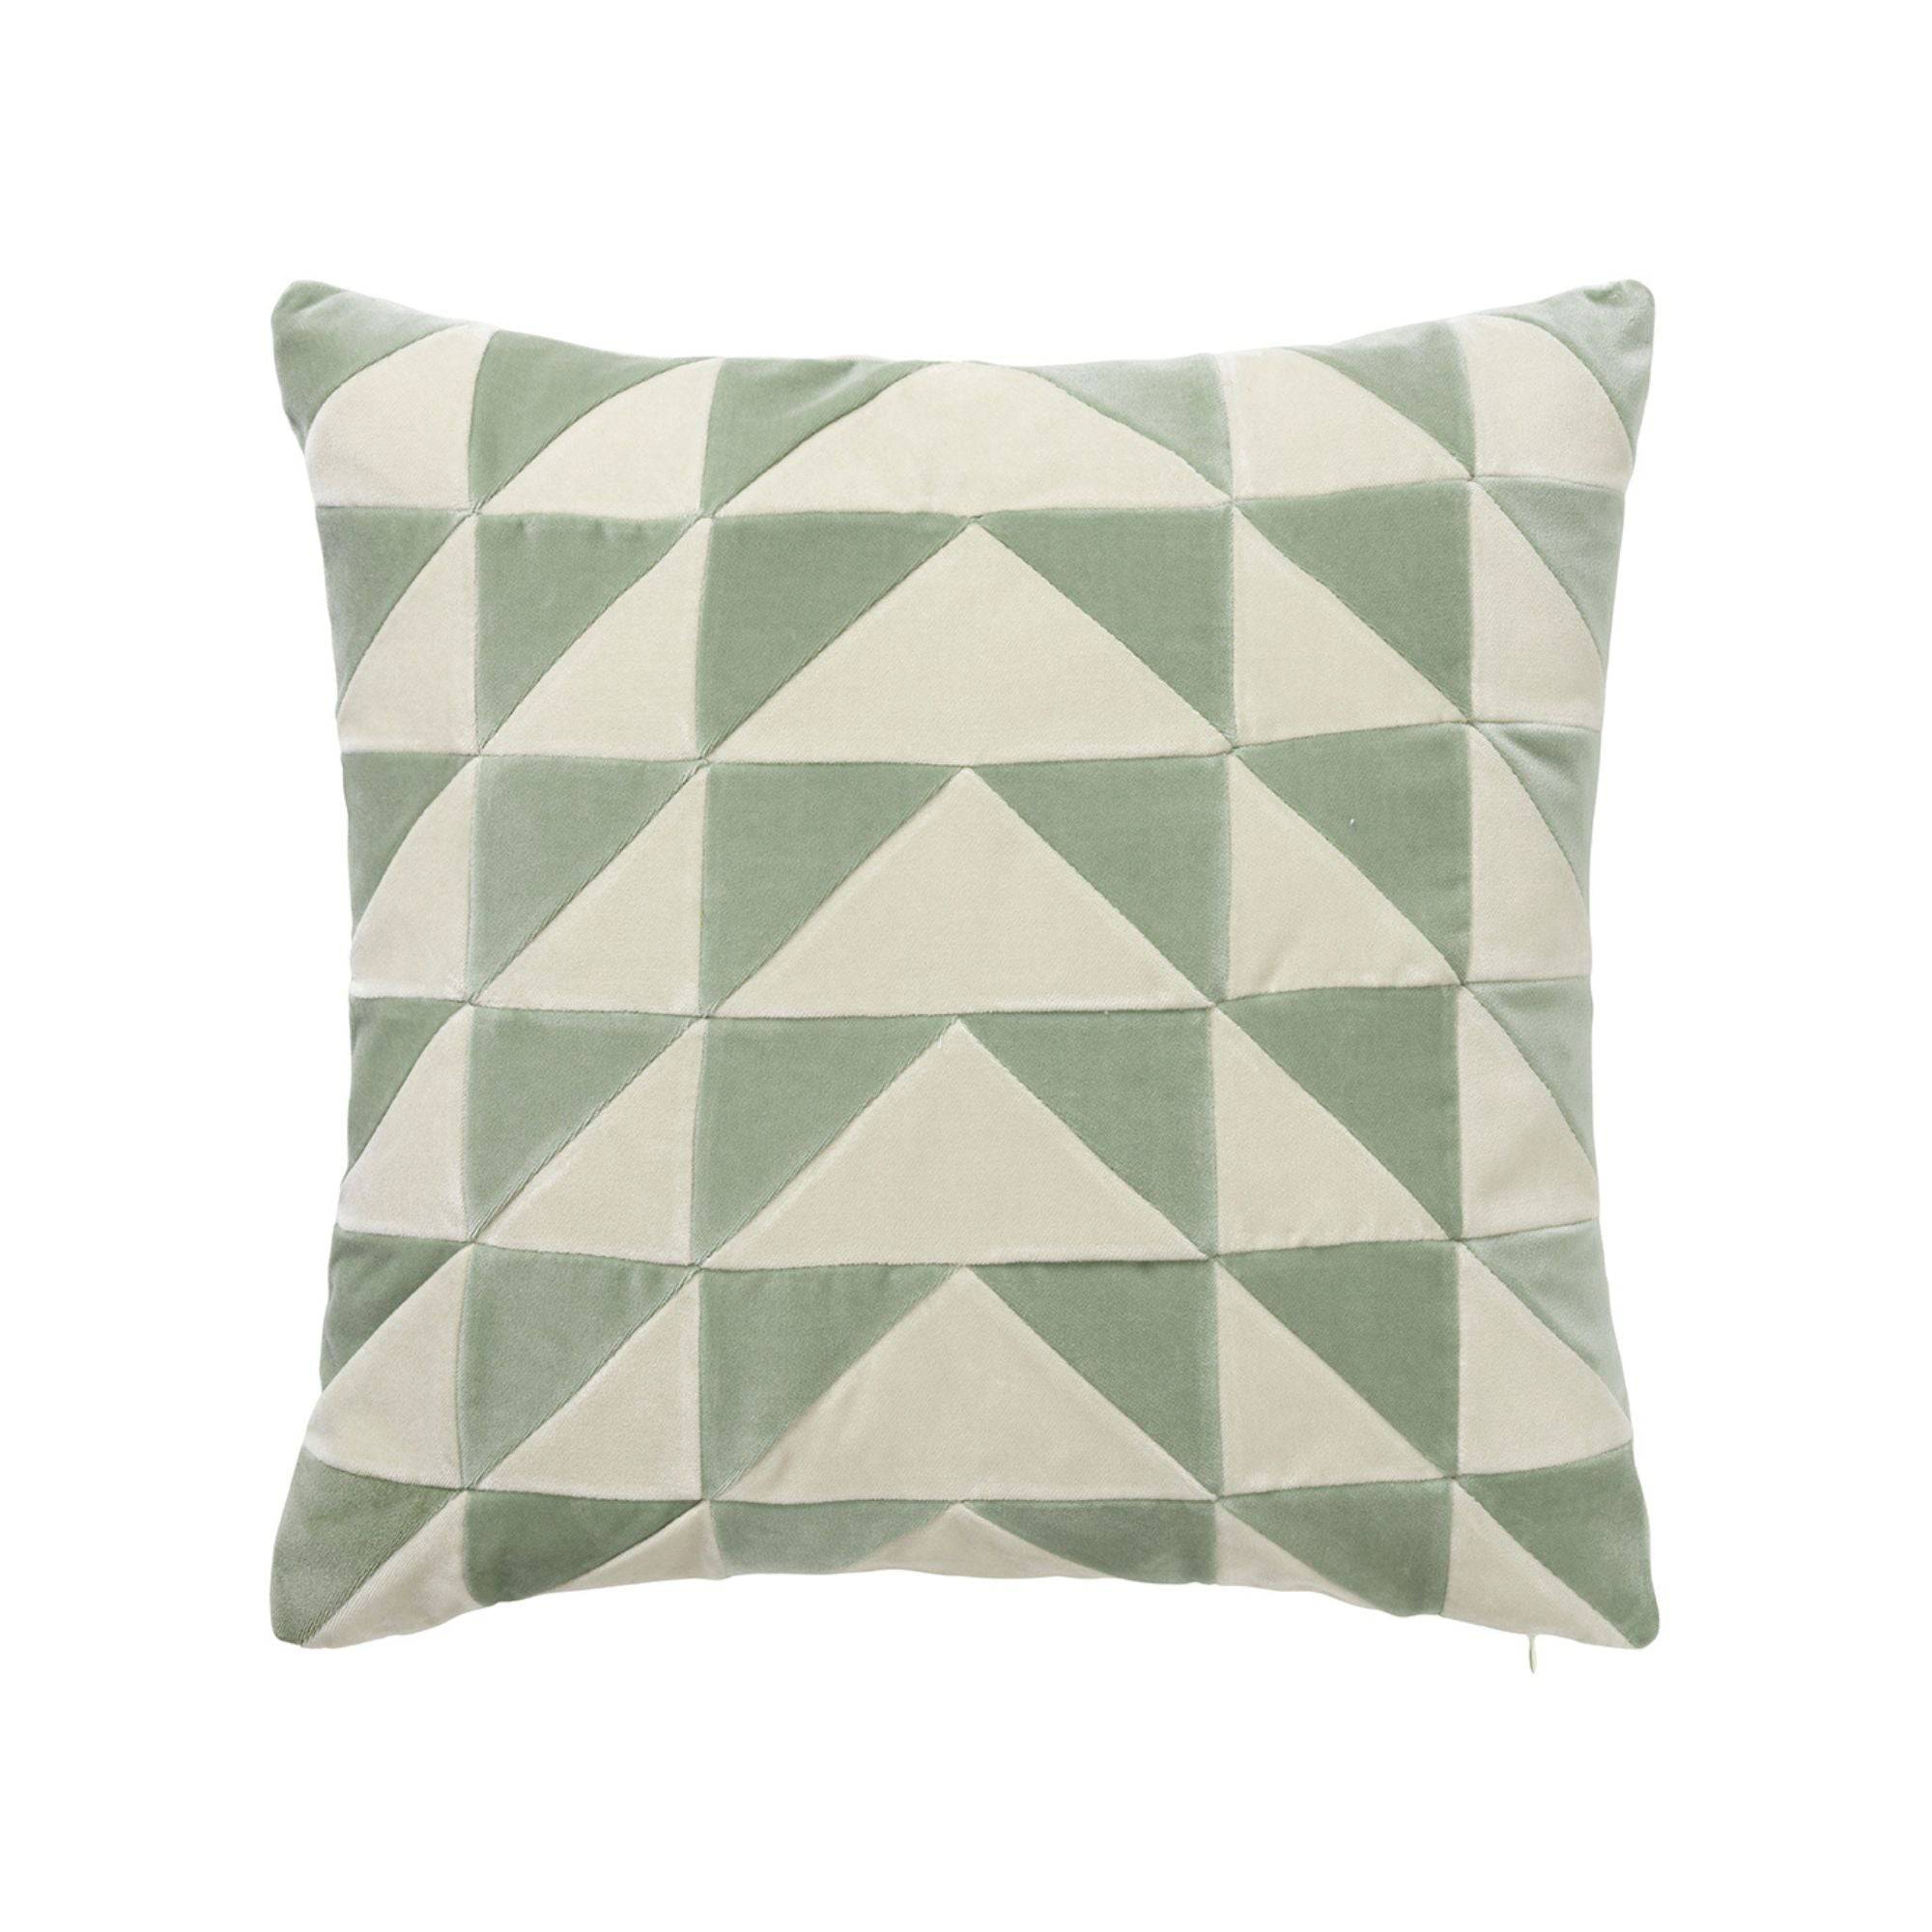 Elly Cushion - Mint & Dusty White - THAT COOL LIVING